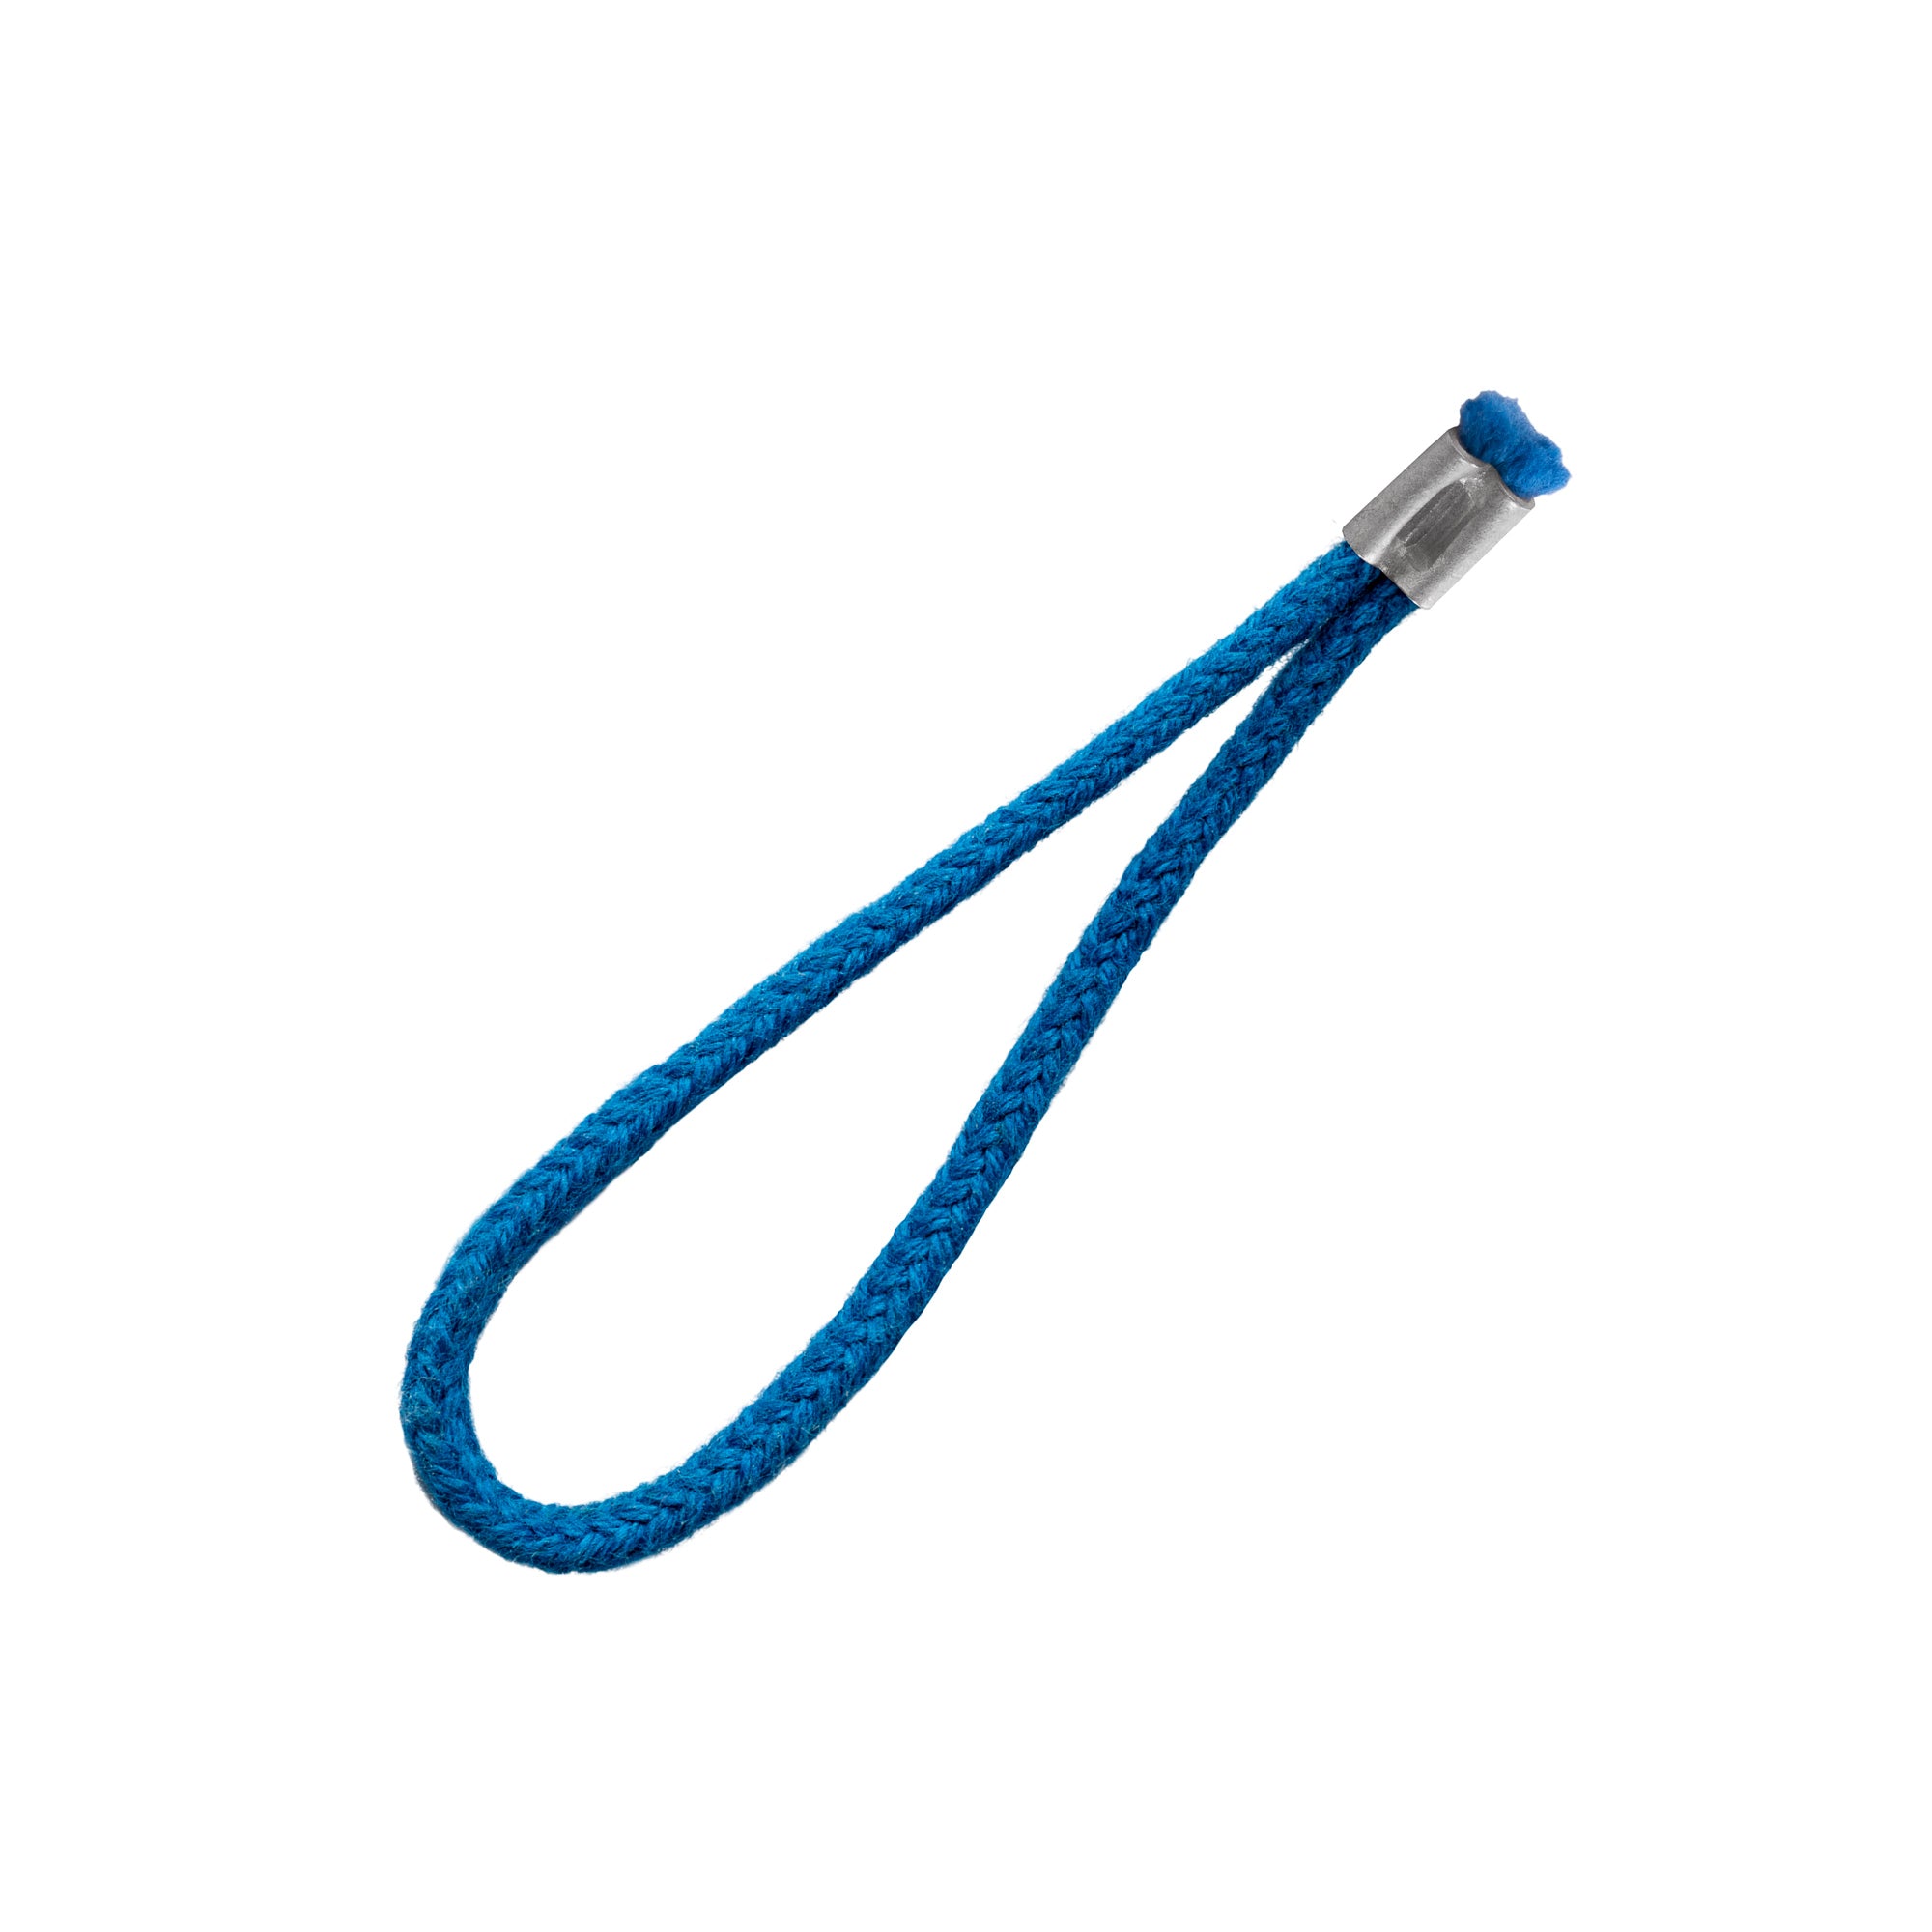 MÜHLE Companion Exchangeable Cord, Blue